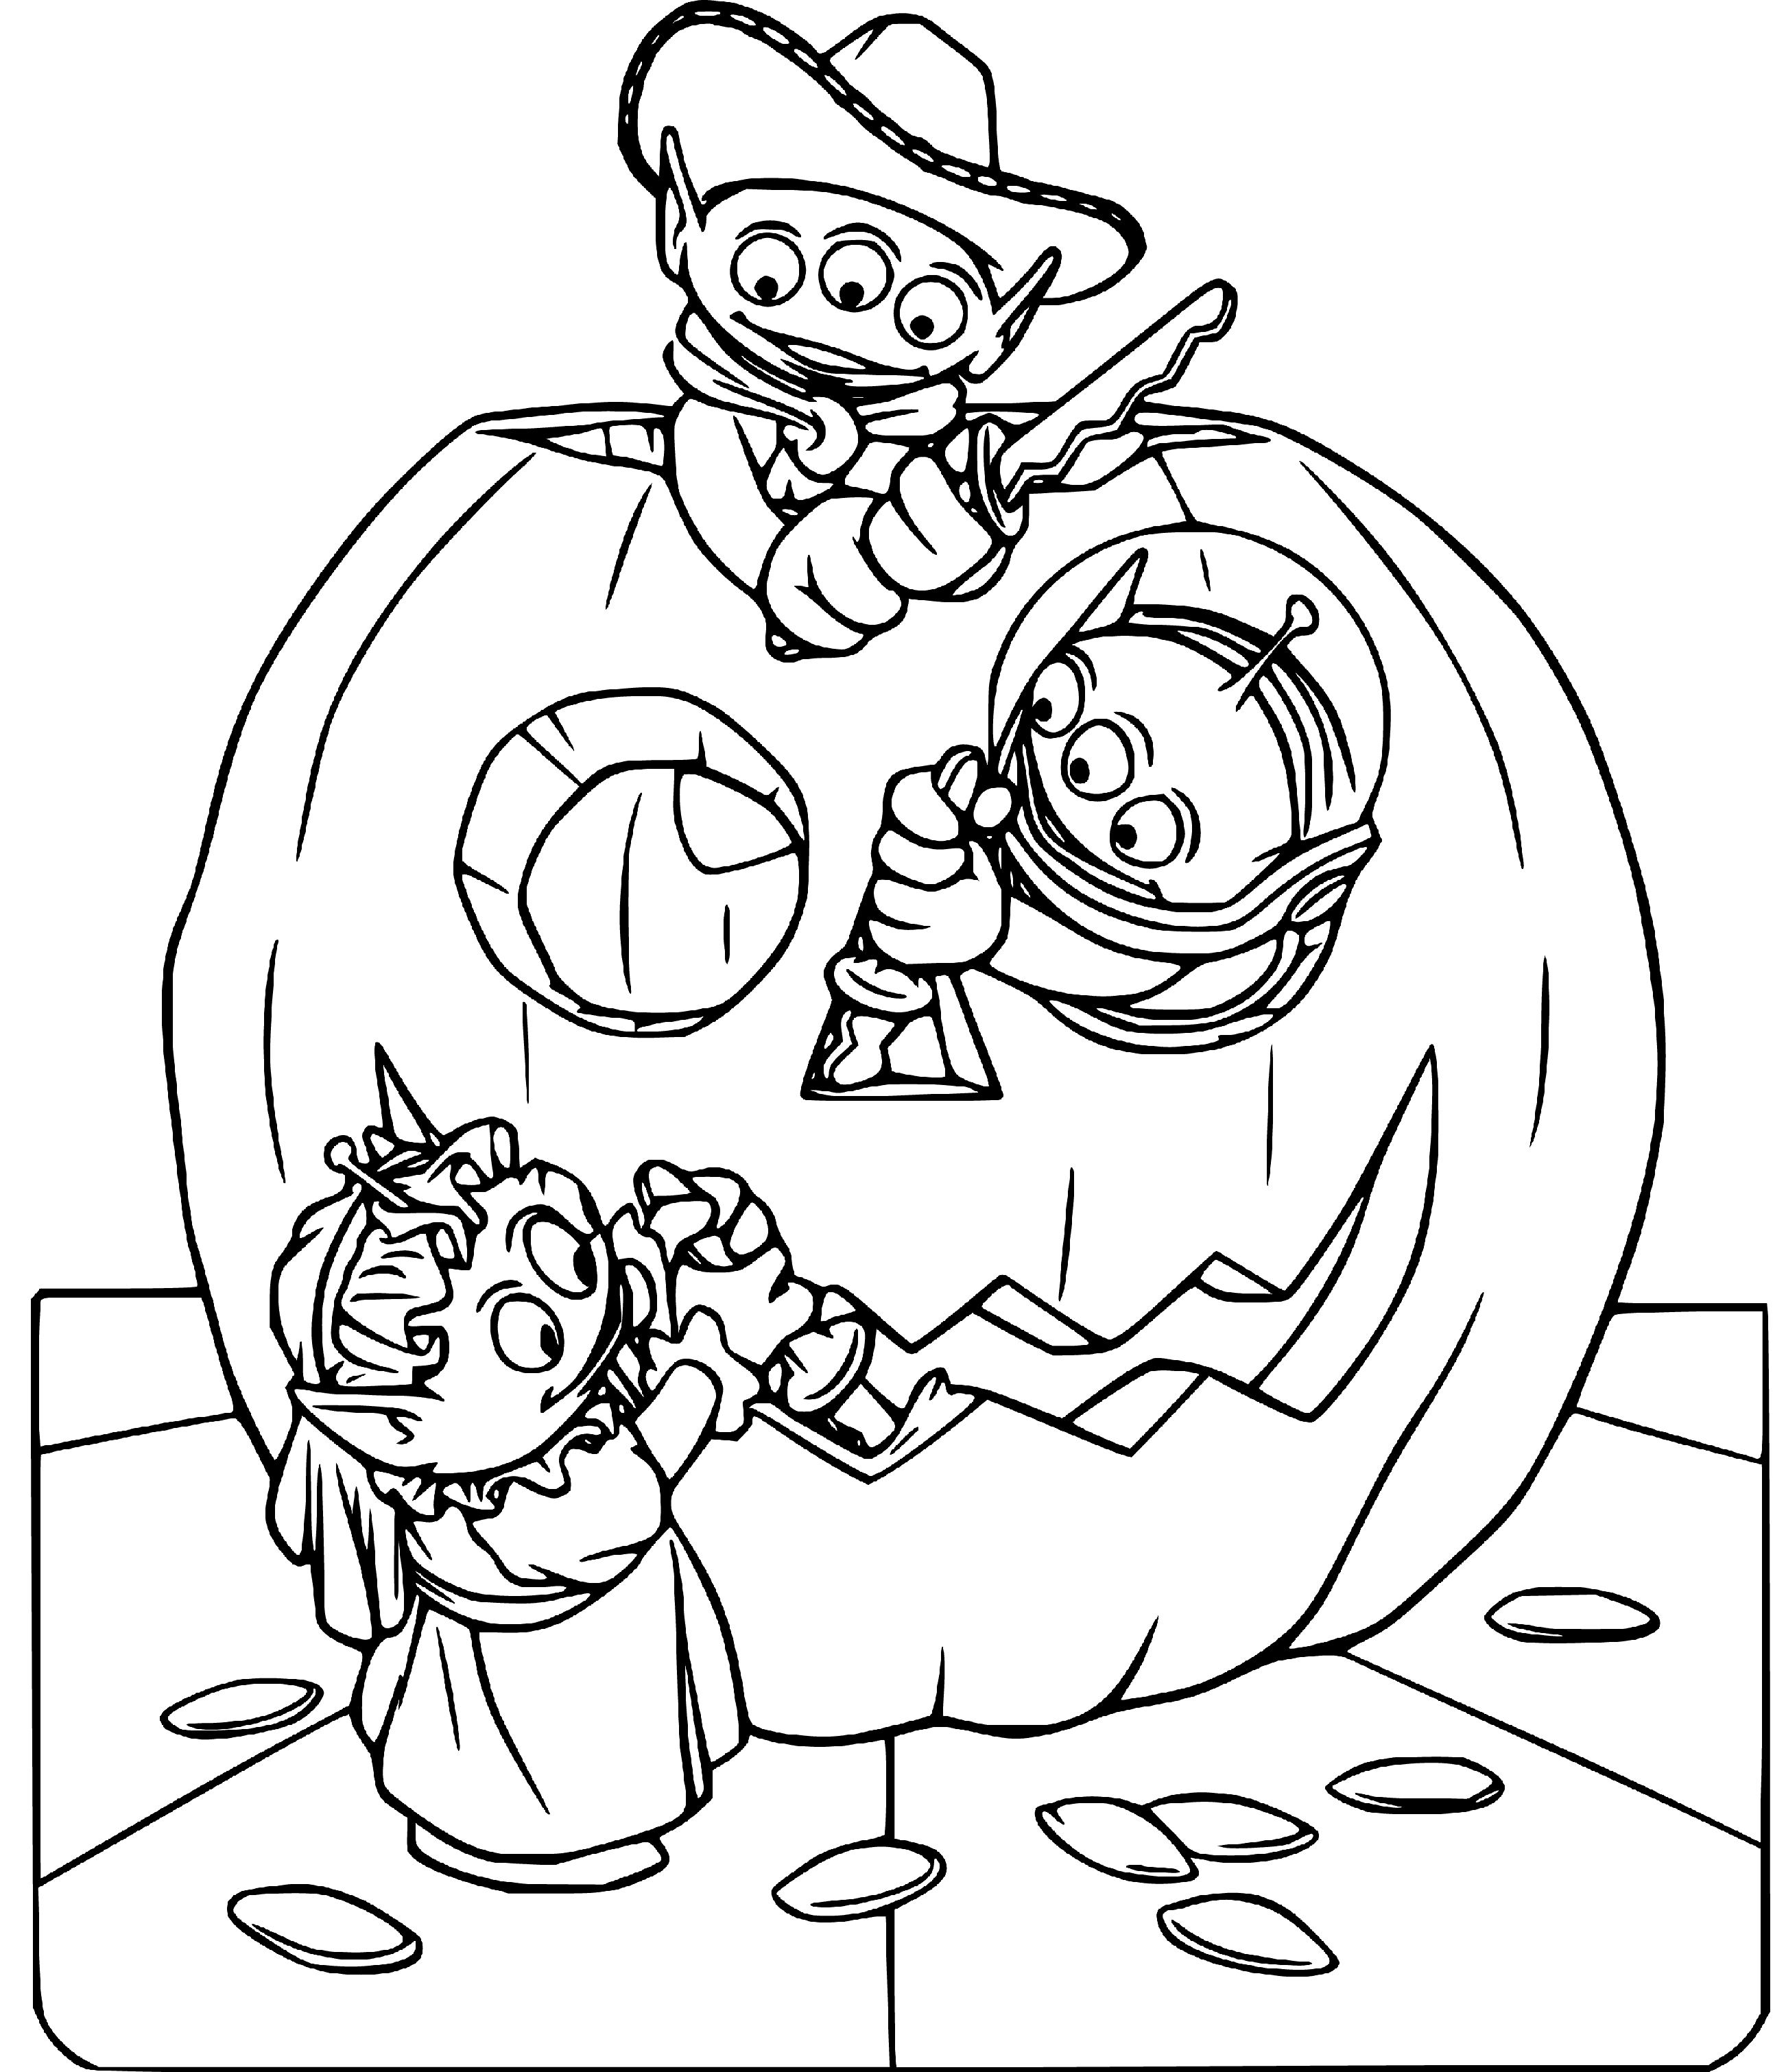 Toy Story Aliens Halloween Coloring Pages to Print for Kids - SheetalColor.com